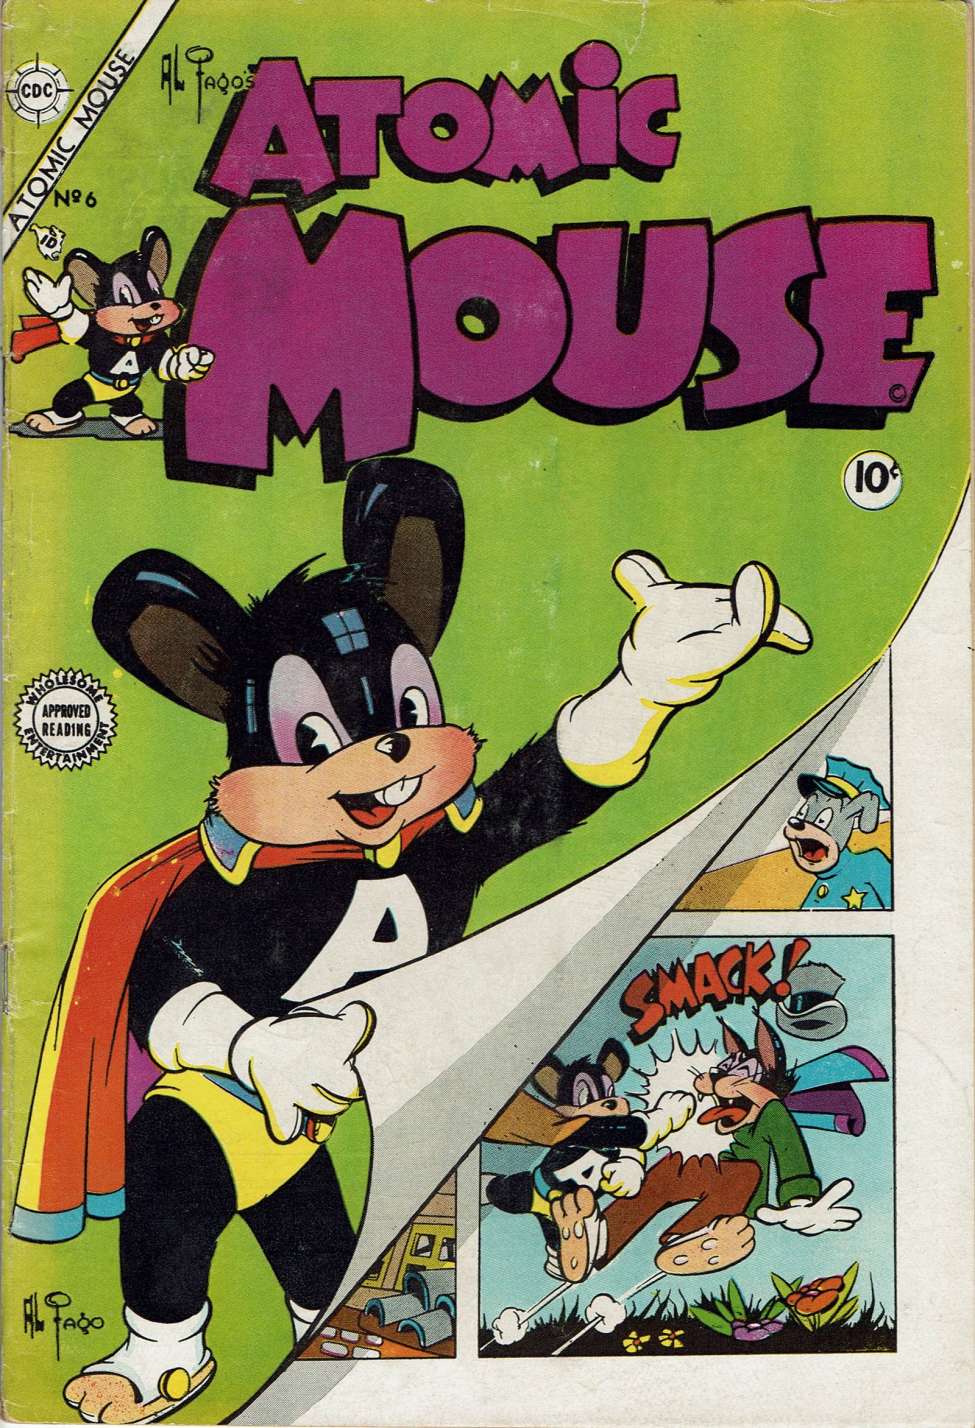 Book Cover For Atomic Mouse 6